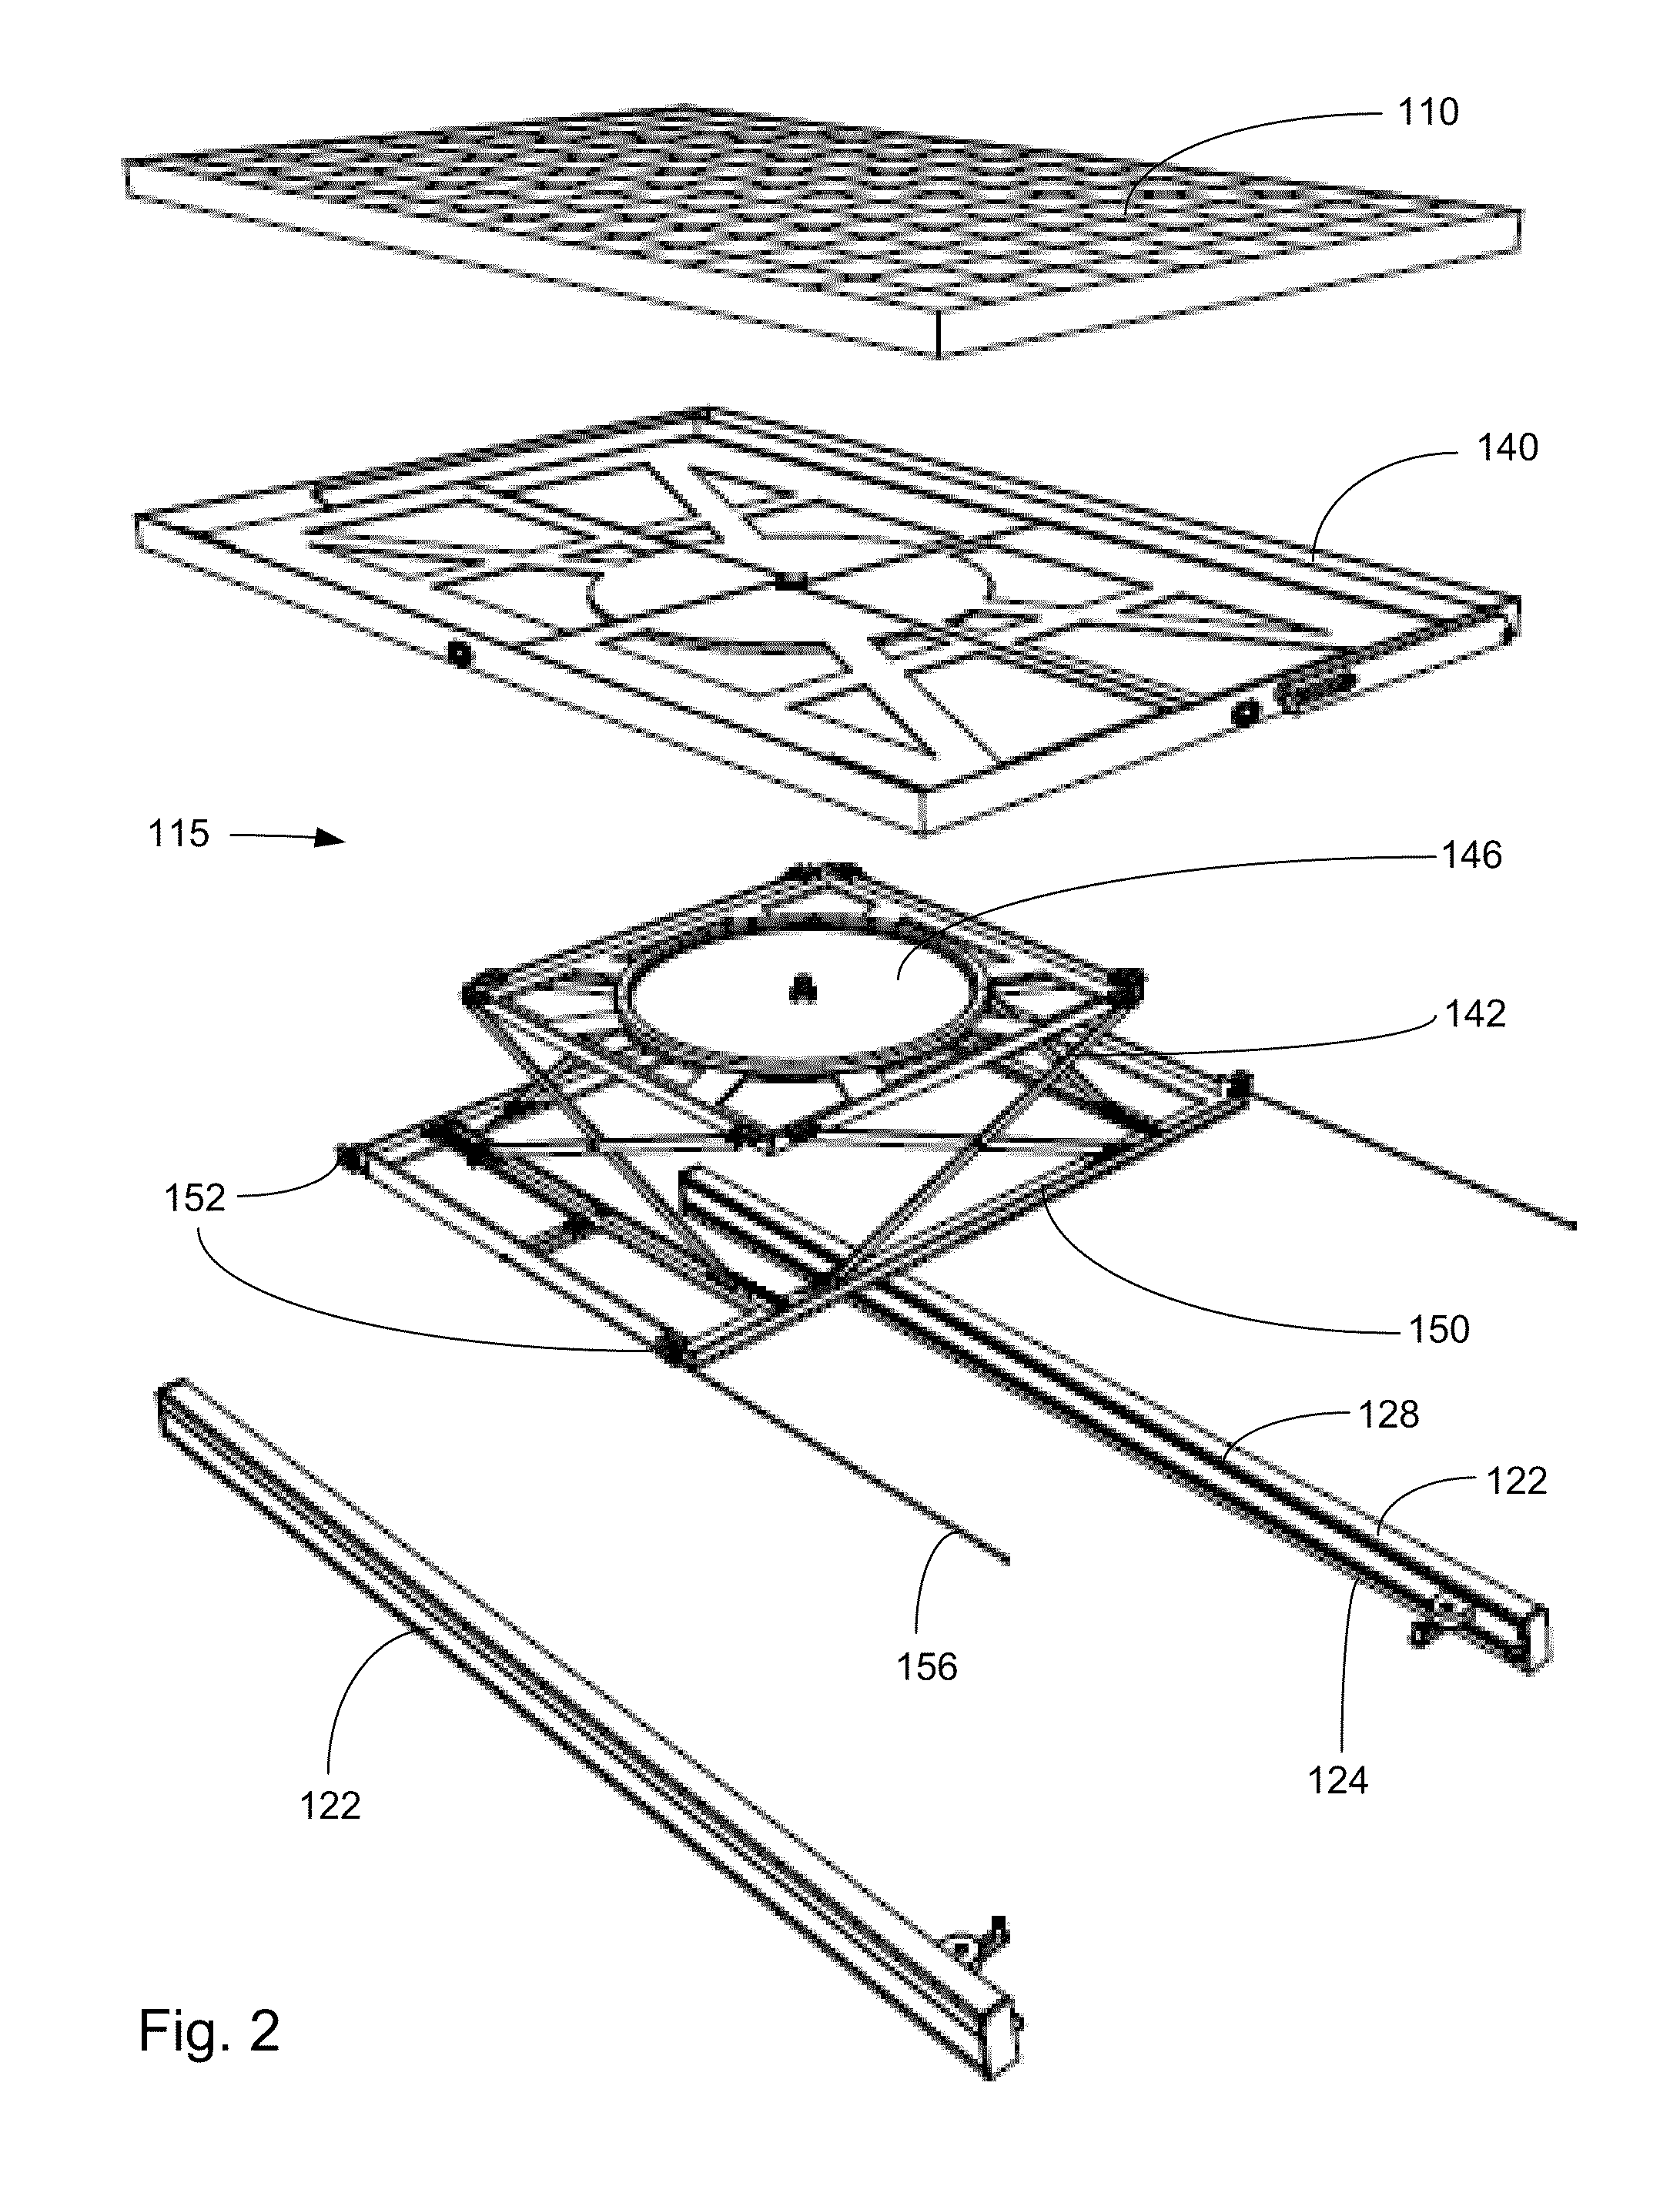 Solar collector support system for efficient storage, transport, and deployment of an expandable array of rotatable solar collectors